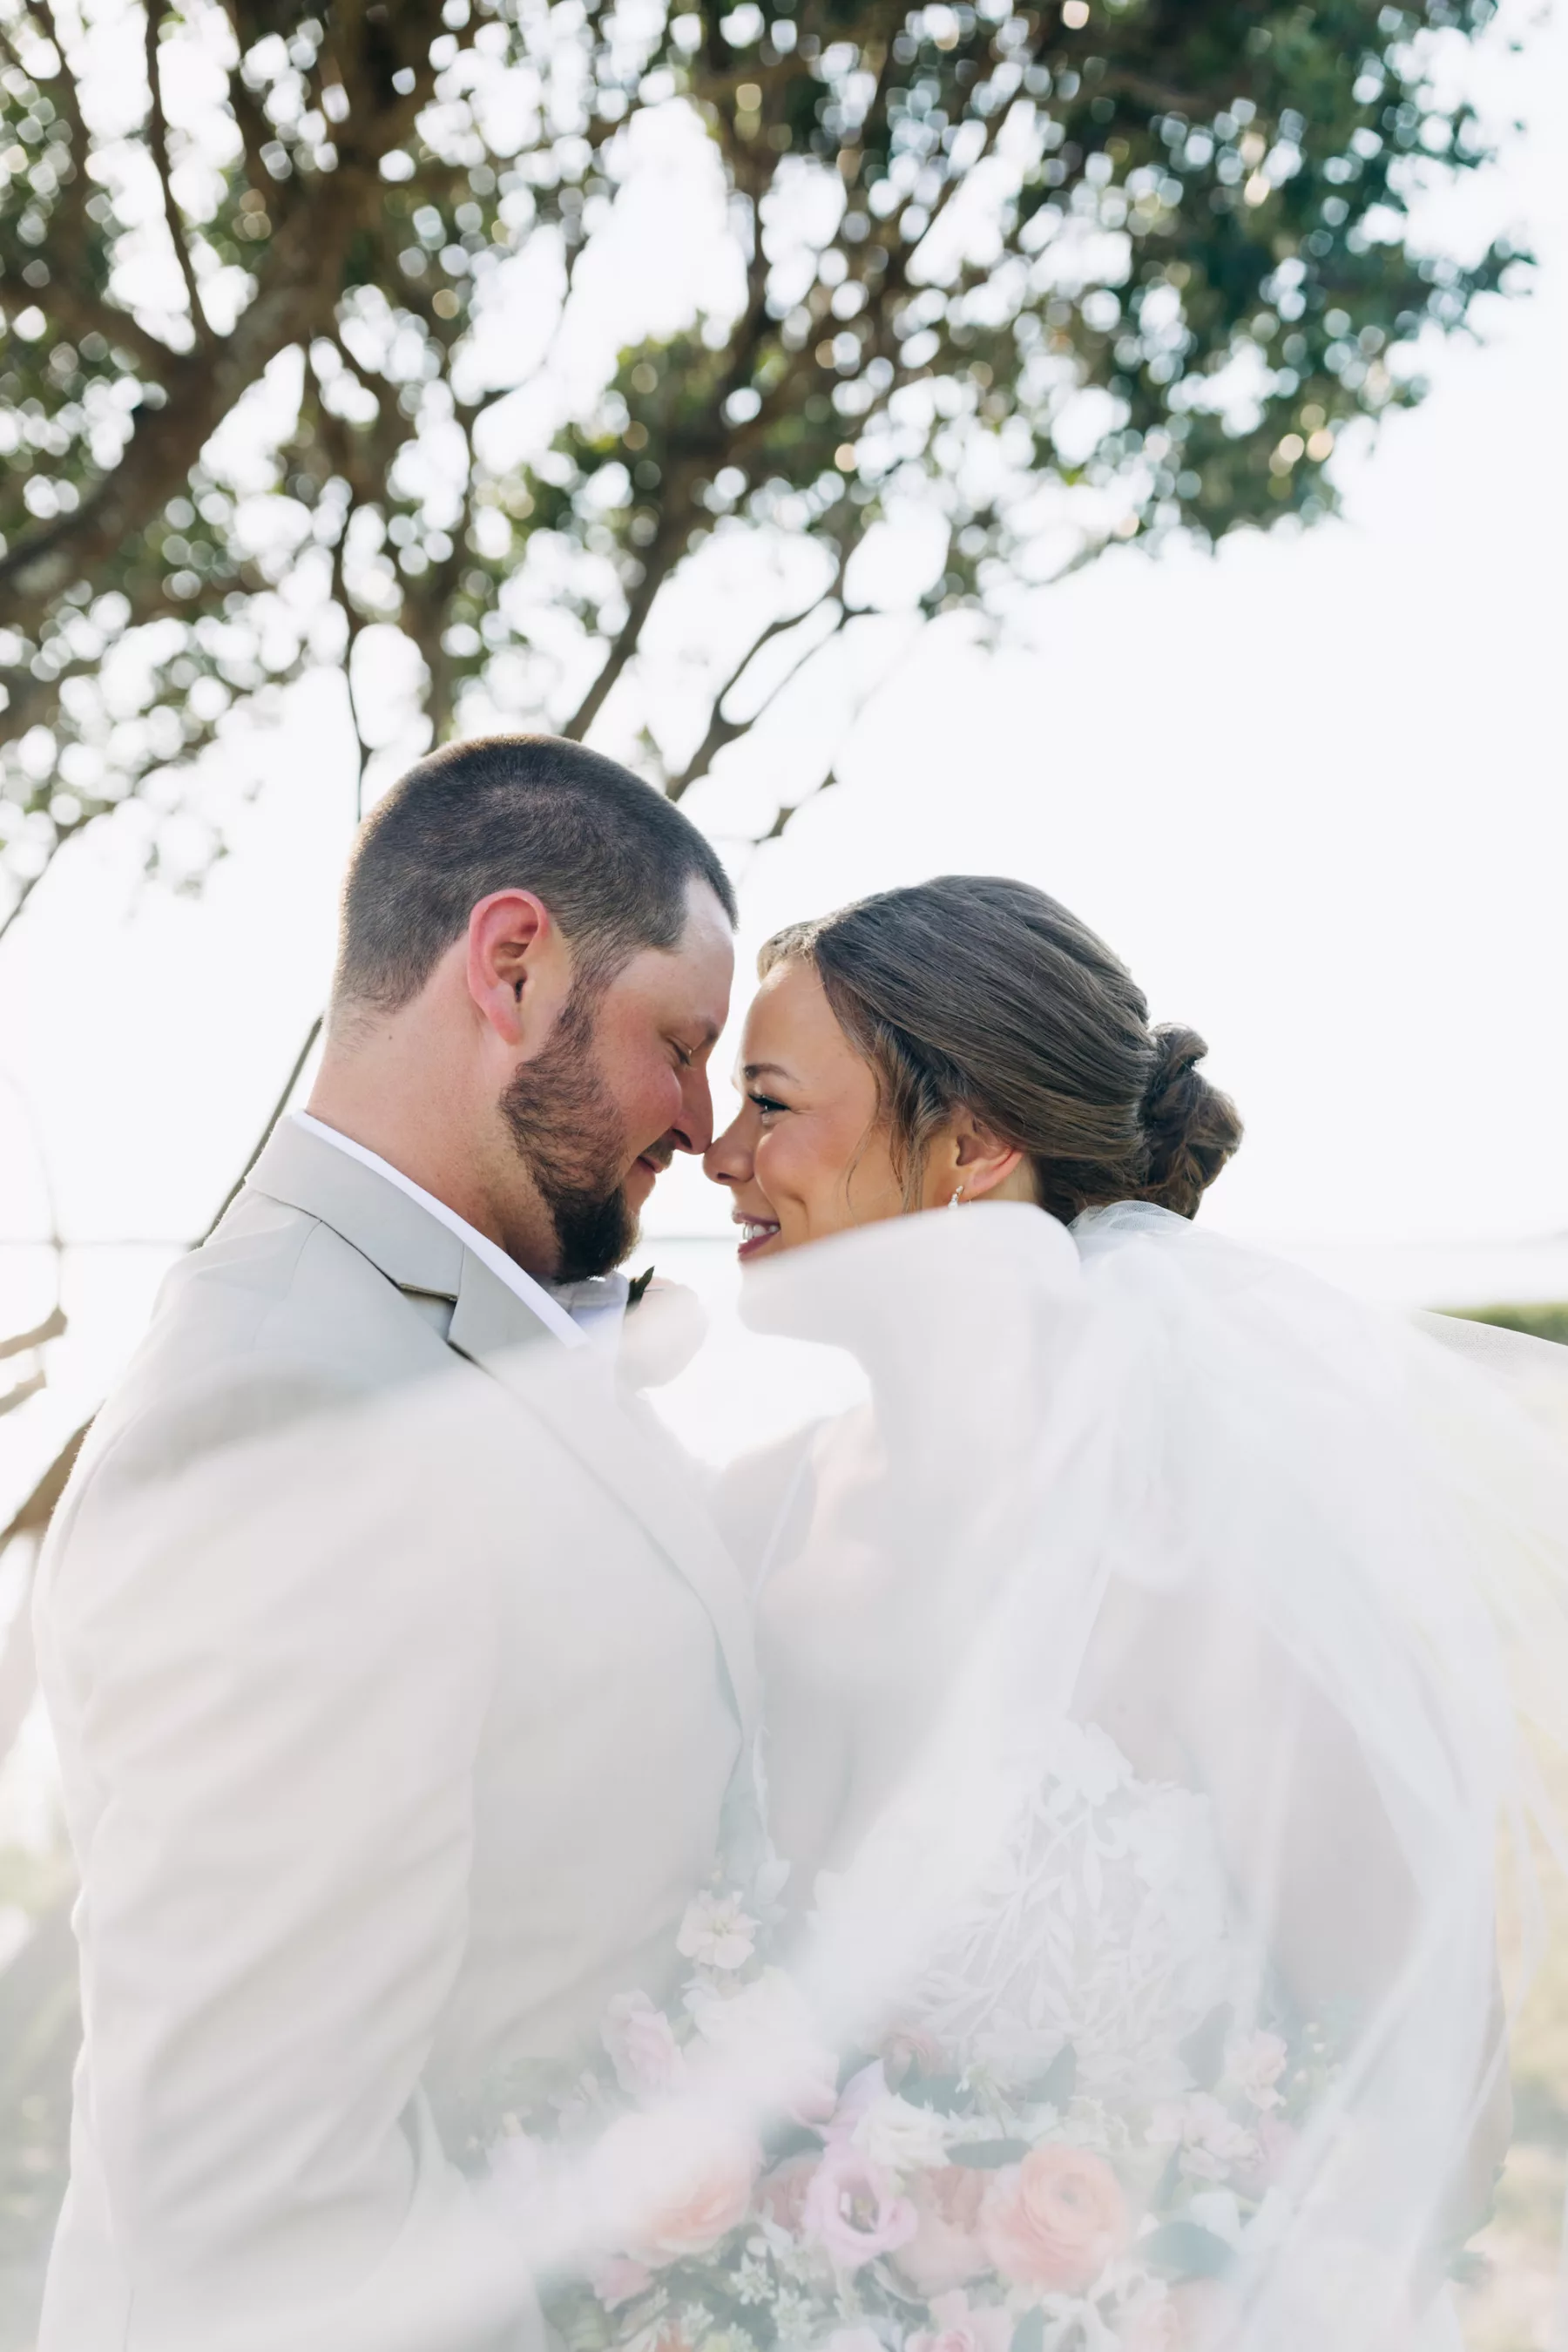 Intimate Bride and Groom Wedding Portrait | Tampa Bay Photographer Amber McWhorter Photography